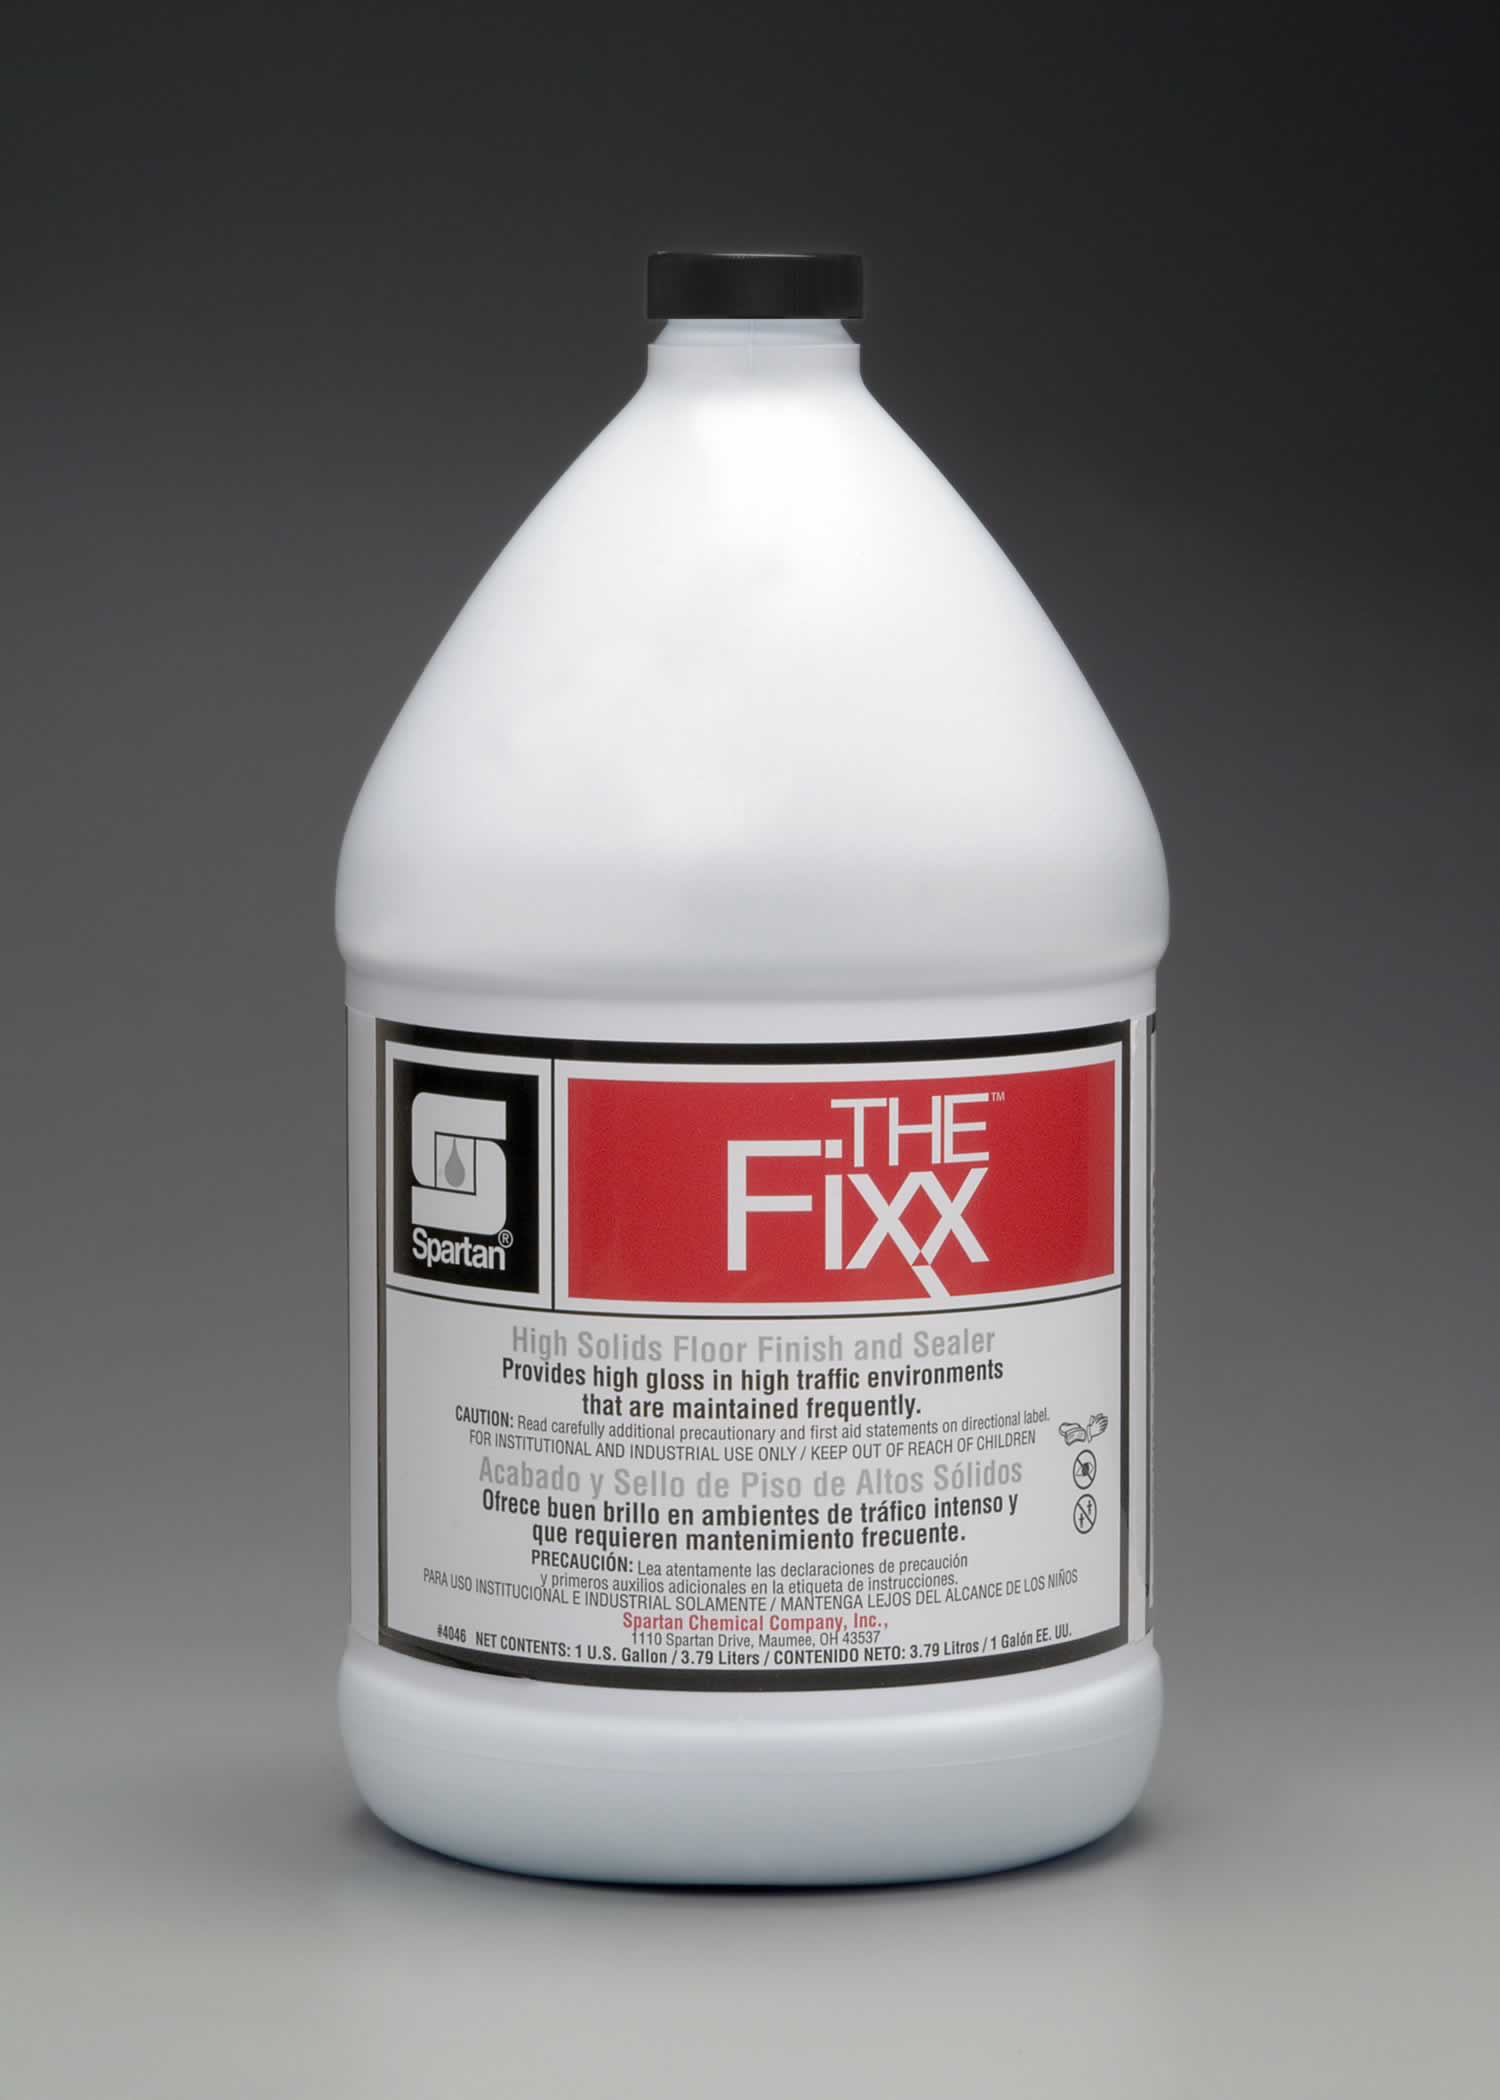 The Fixx floor finish and sealer for high and ultra-high speed buffing